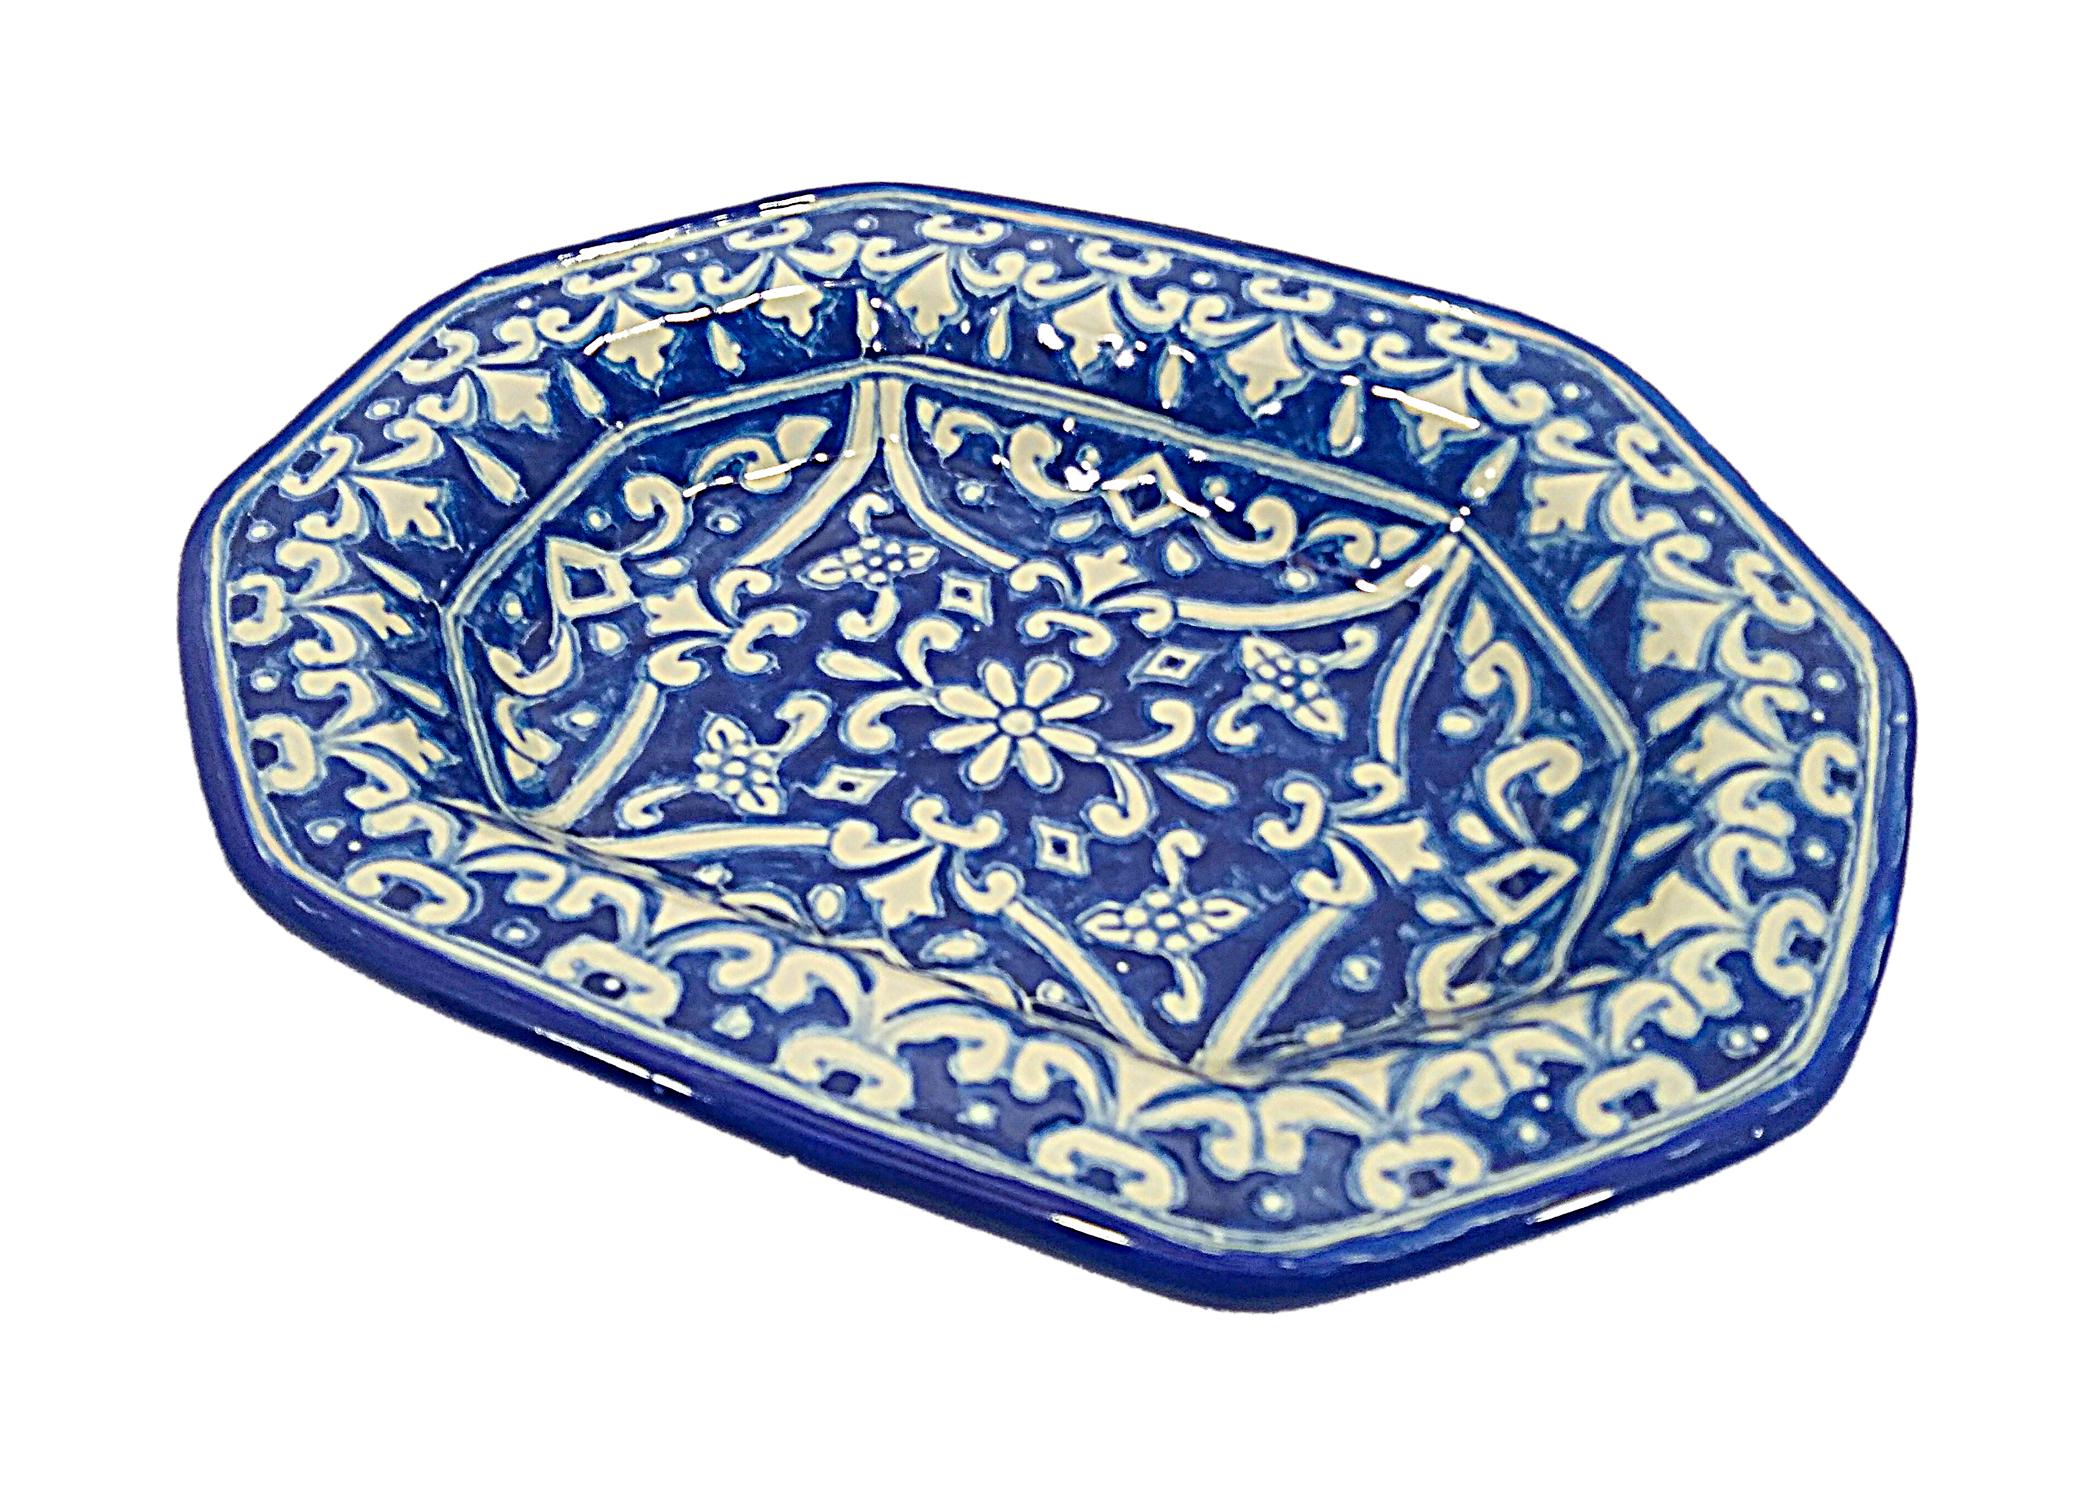 Elegant white and blue plate made with the Talavera technique. Artist, Cesar Torres portraits the colonial art of Mexico. 

The Talavera is not just a simple painted ceramic: its exquisite decoration is the product of a delicate process of alchemy